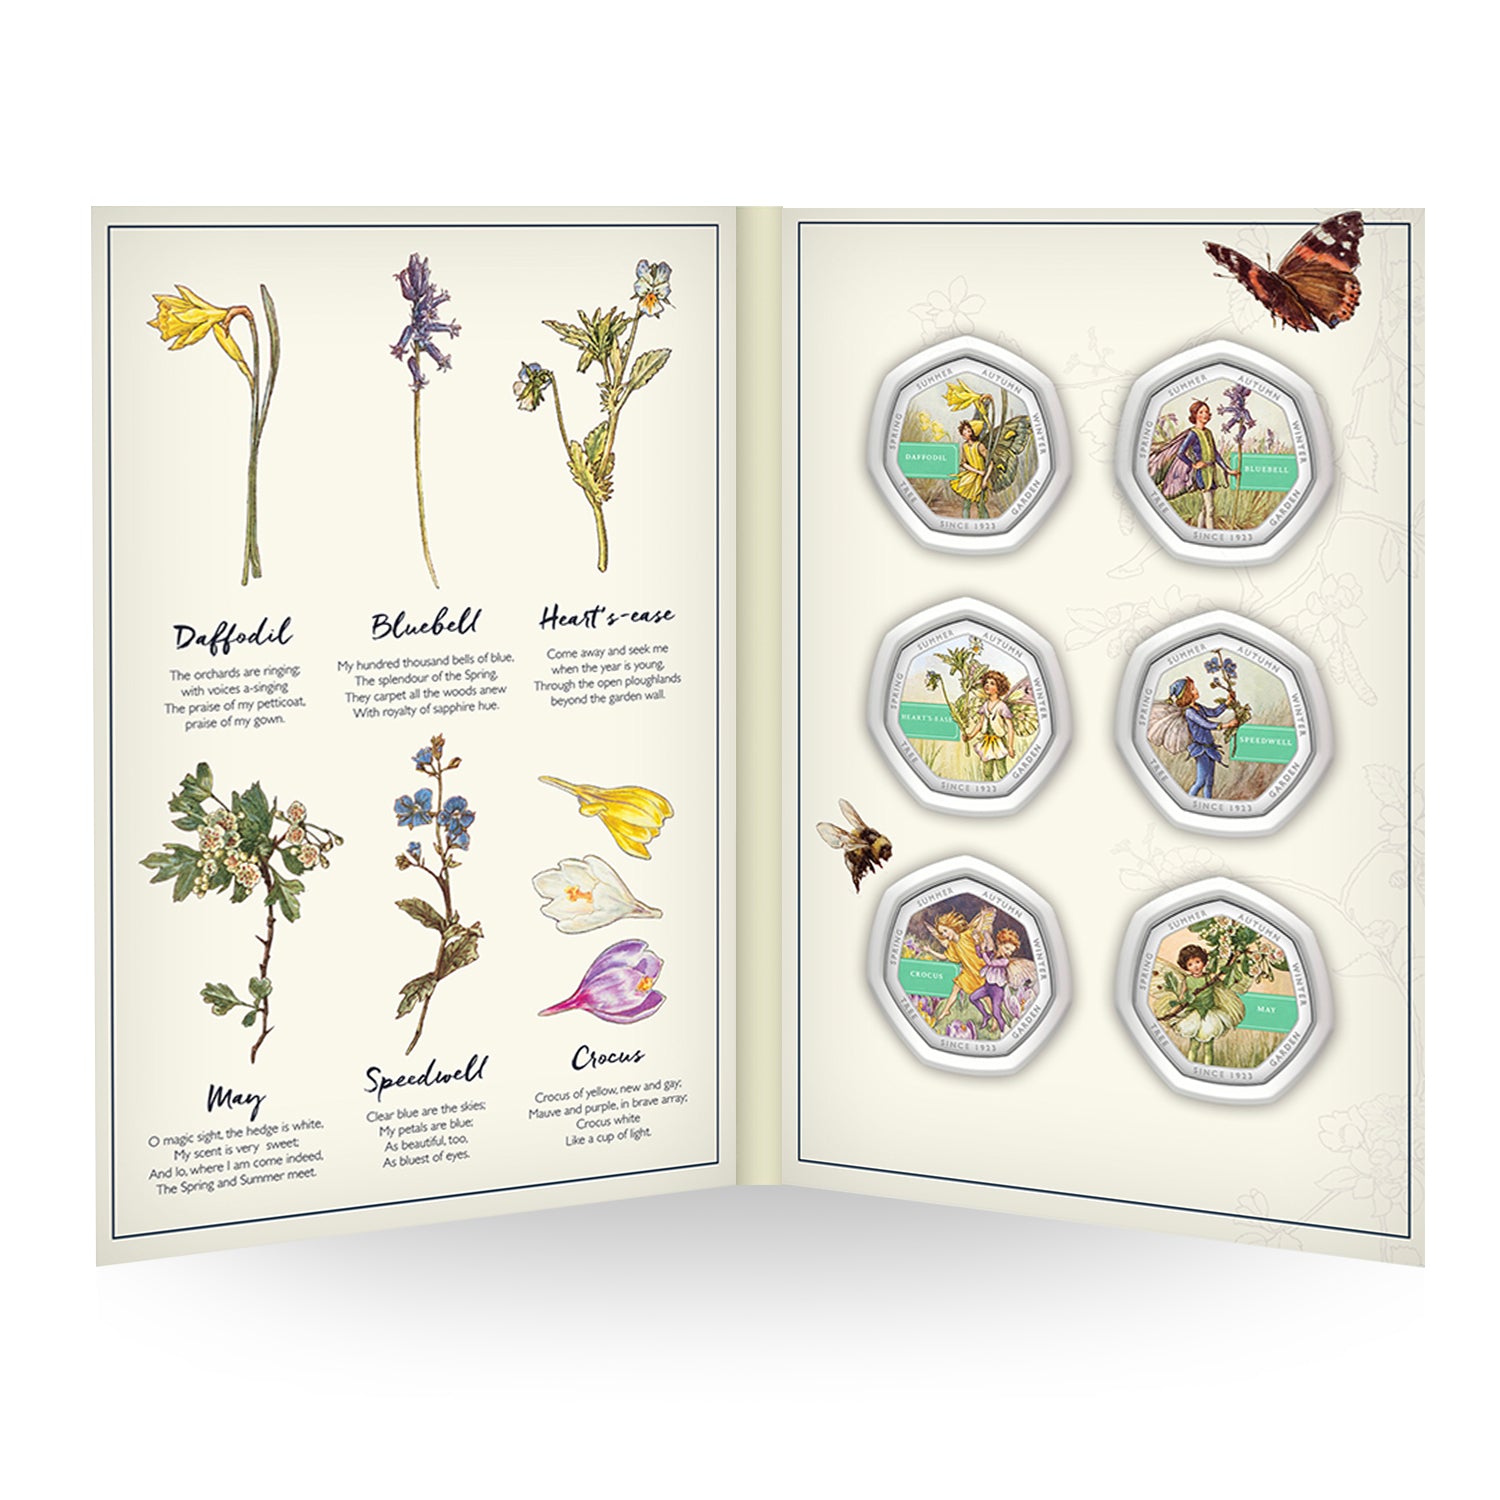 The Flower Fairies Spring Collection Volume I